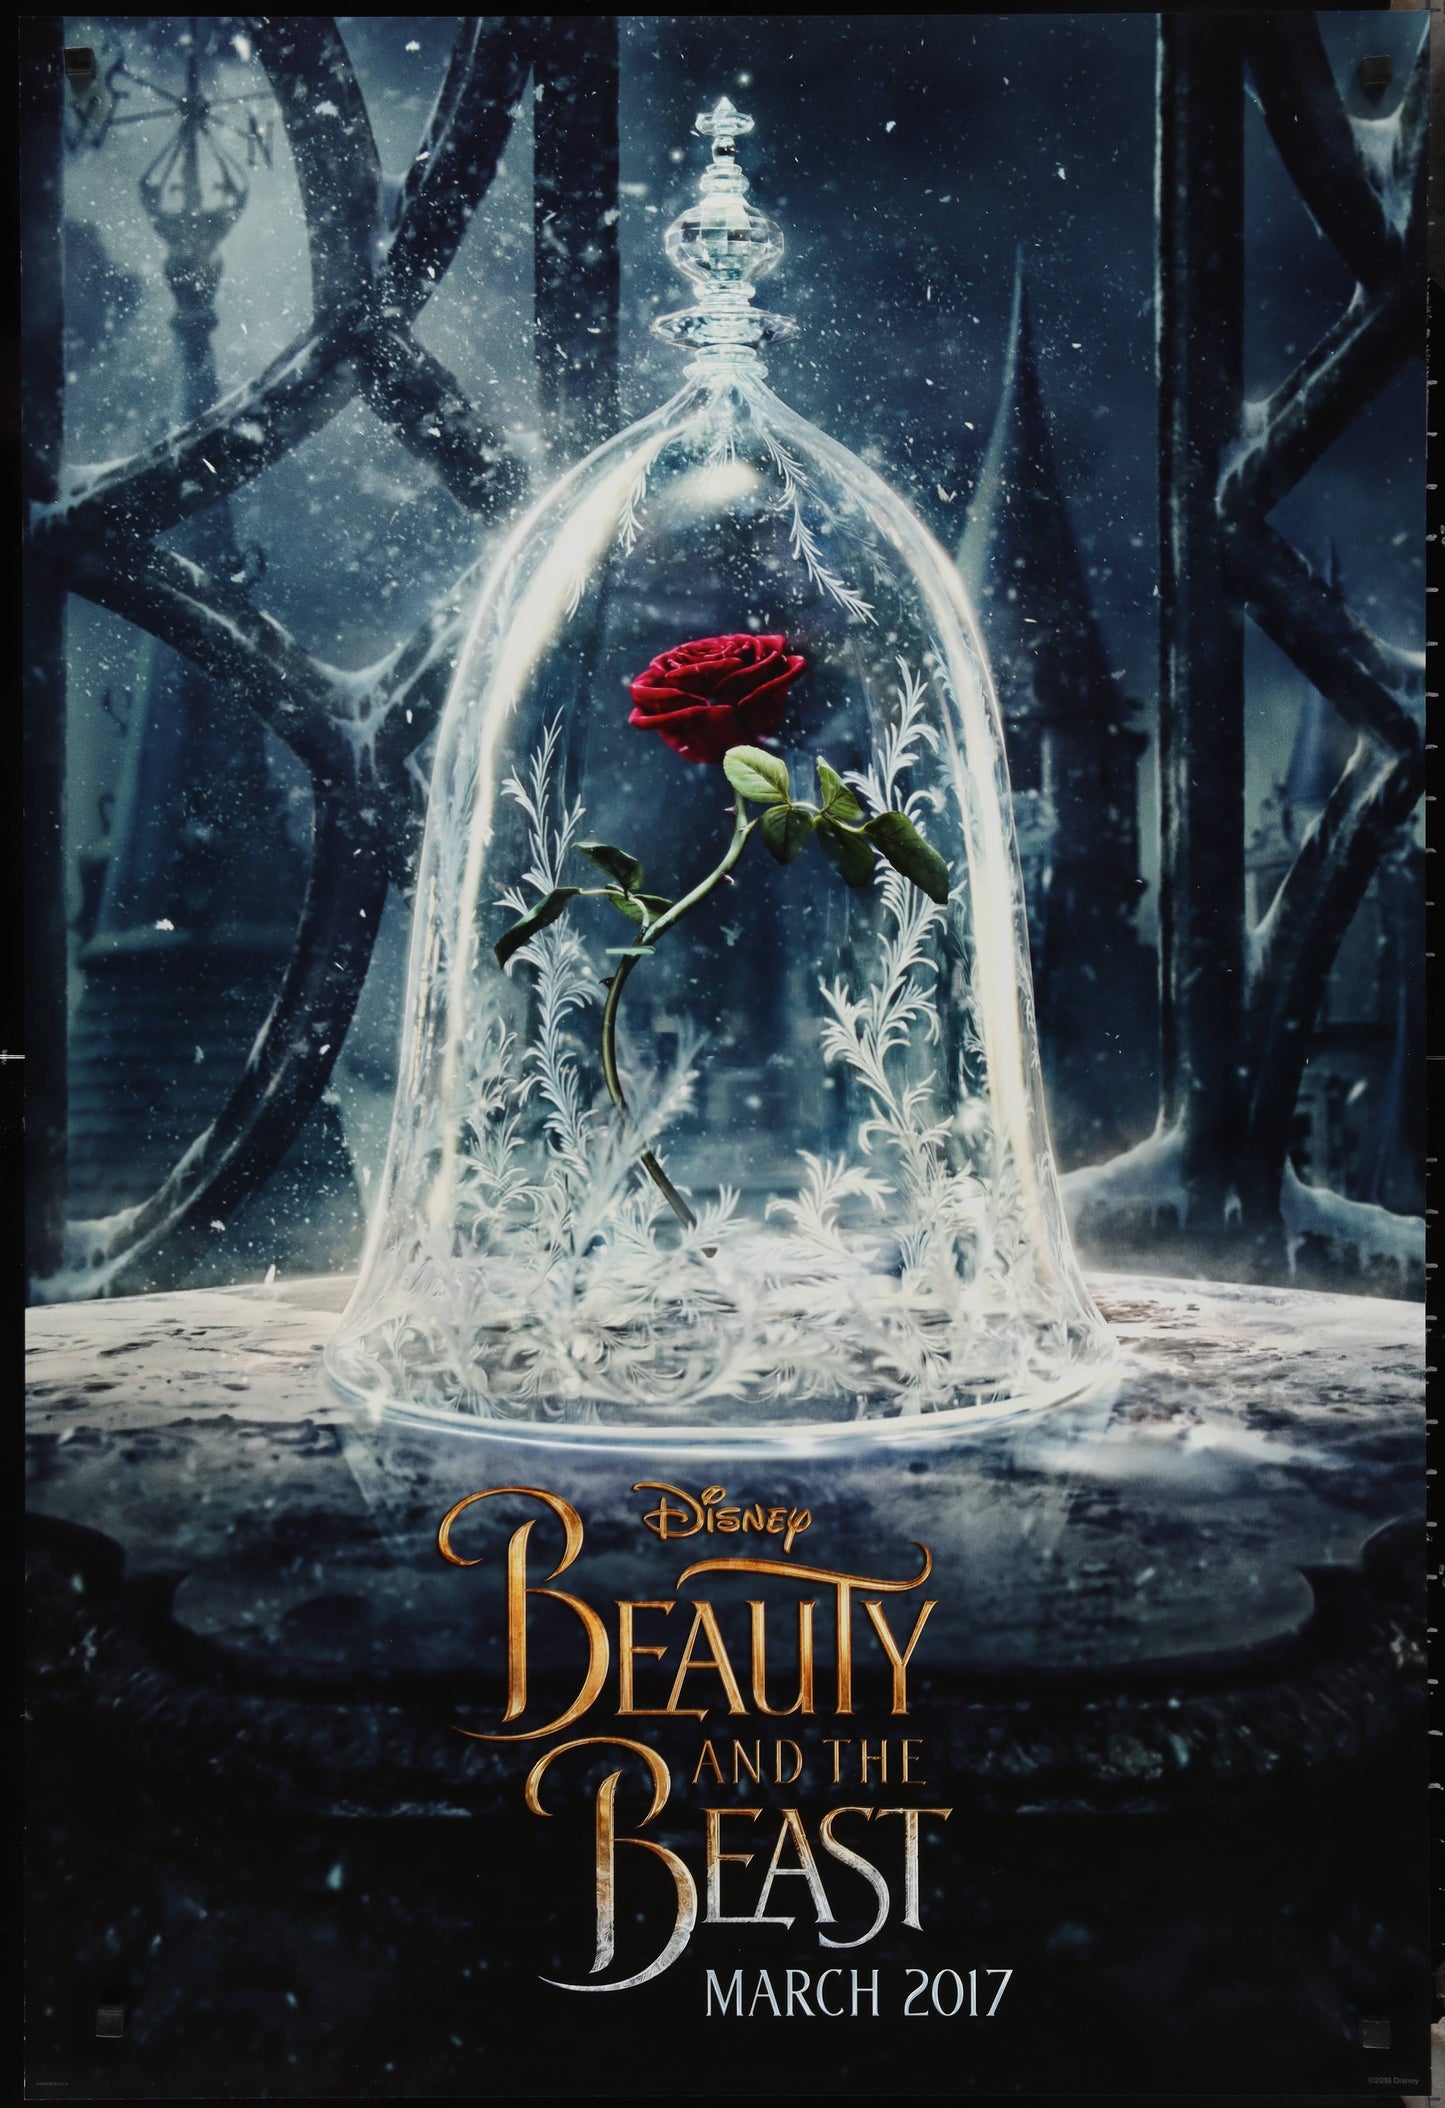 Beauty And The Beast US One Sheet Teaser Style (2017) - ORIGINAL RELEASE - posterpalace.com